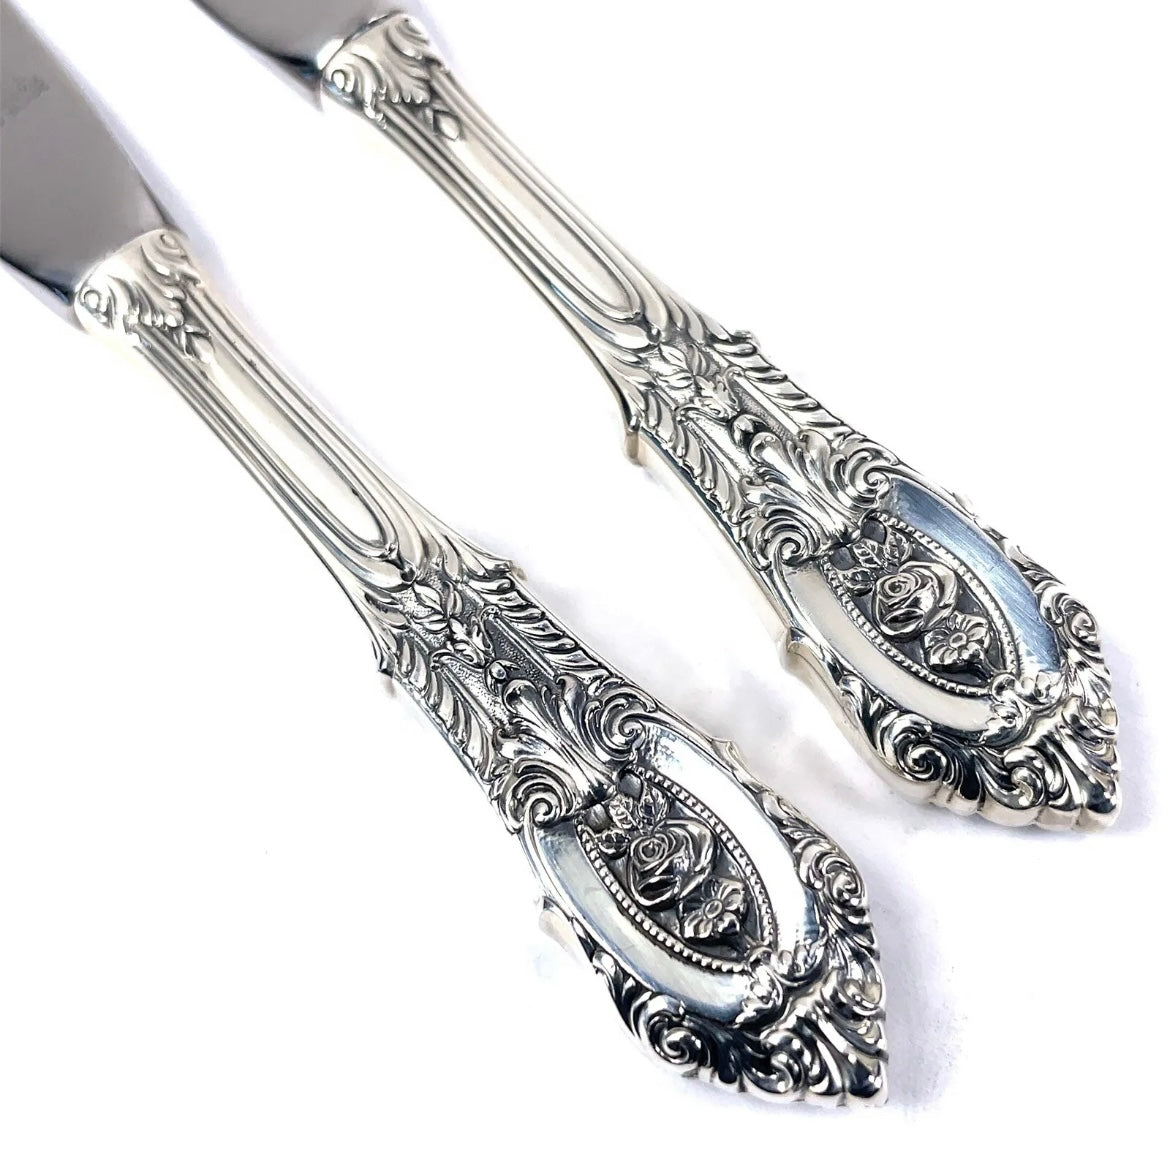 Set of 2 Wallace Rose Point Sterling Silver Butter Spreader 6 1/4"